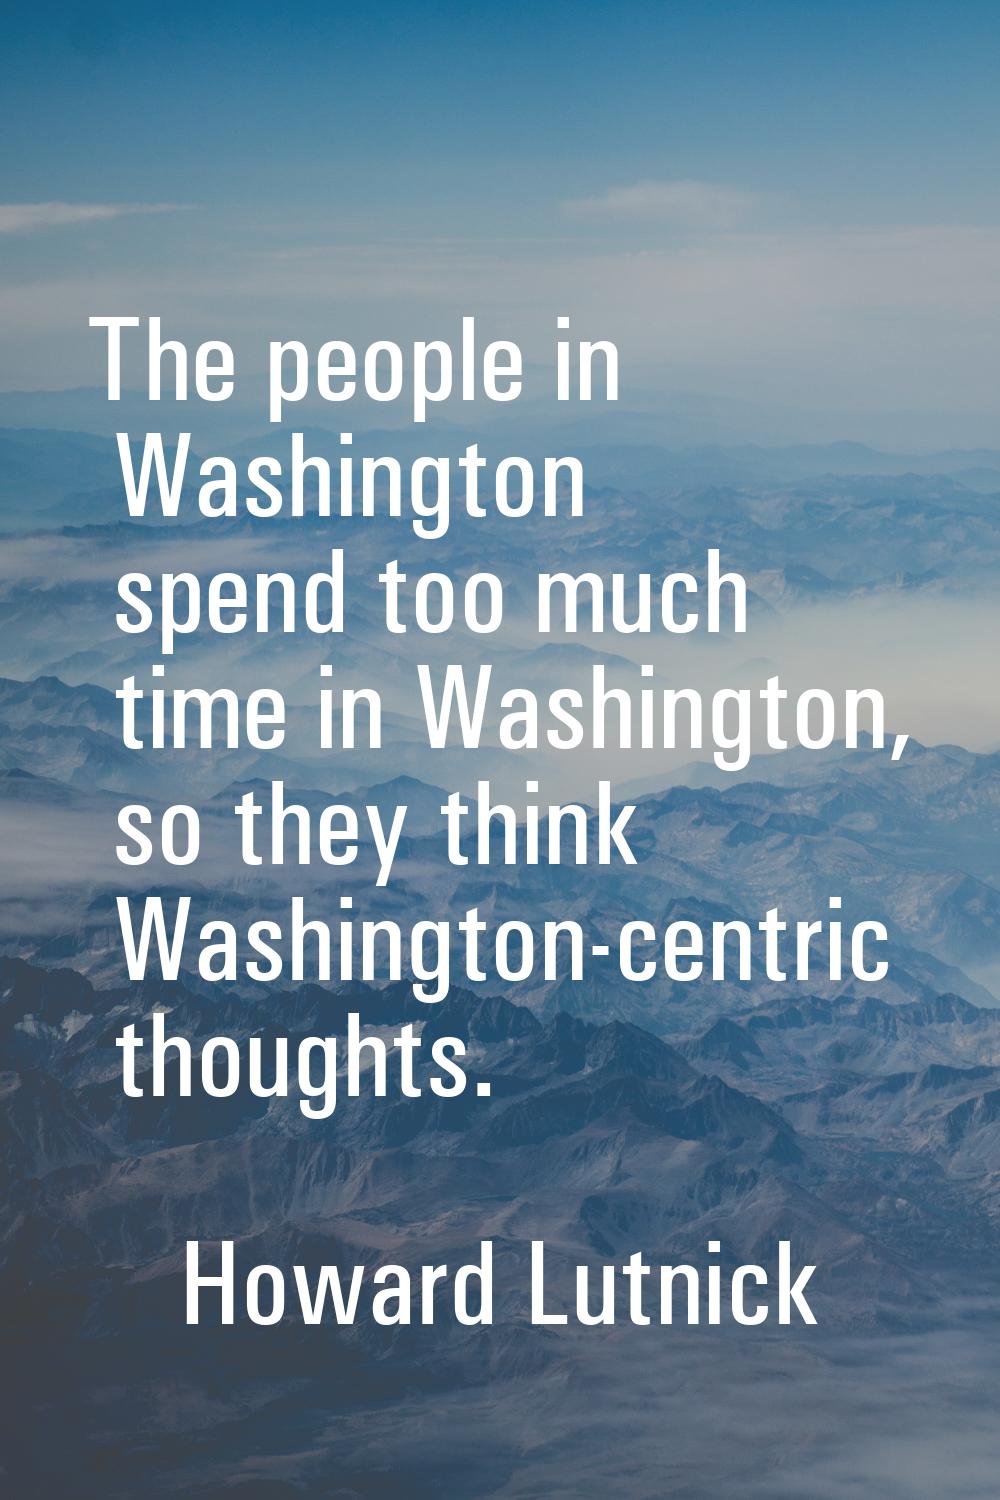 The people in Washington spend too much time in Washington, so they think Washington-centric though